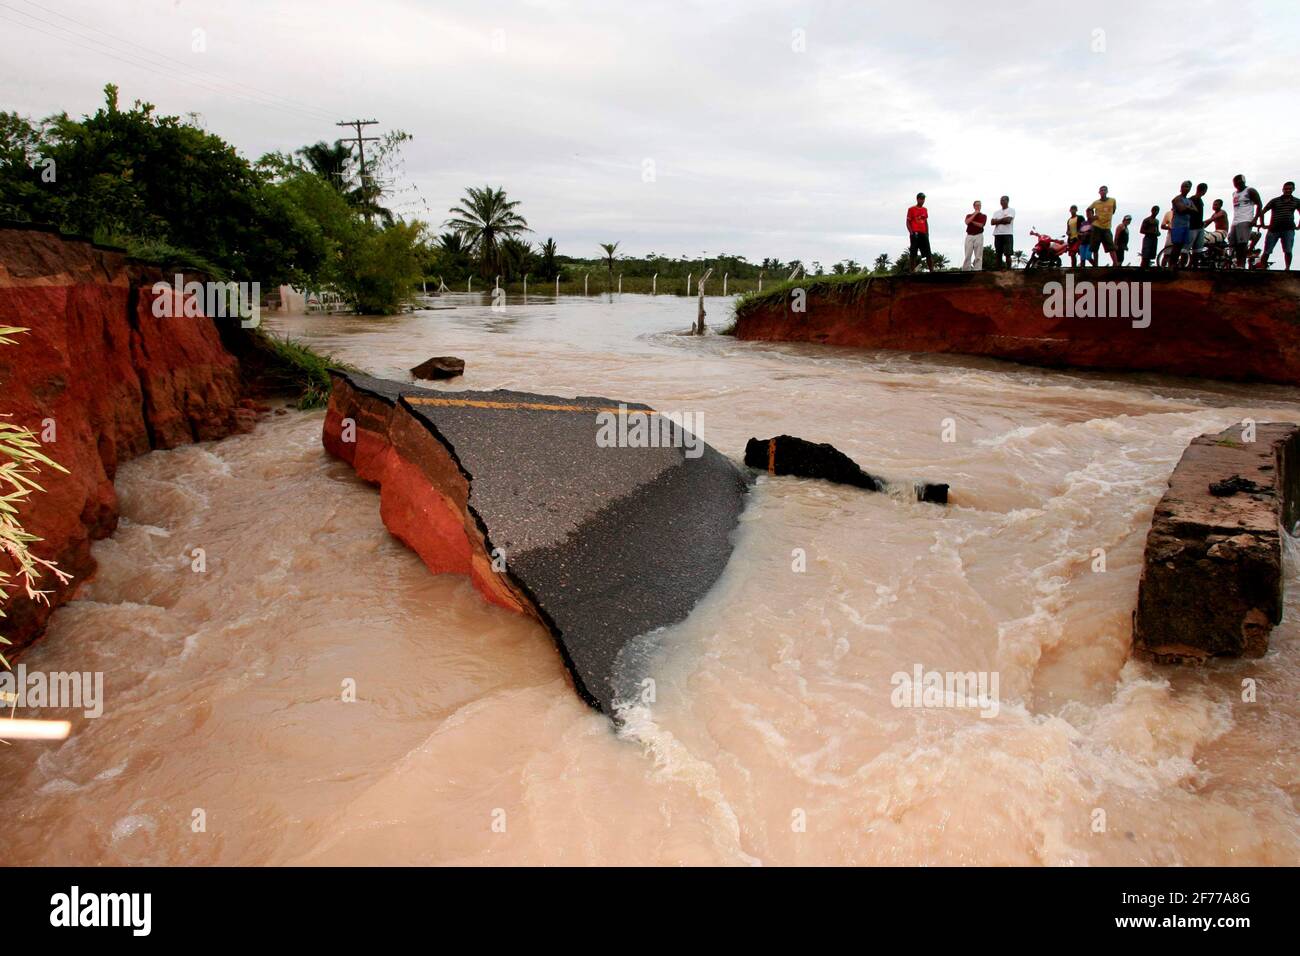 prado, bahia / brazil - april 8, 2010: bridge on highway br 489 is destroyed due to flooding of Campinho stream. communities are isolated in the munic Stock Photo